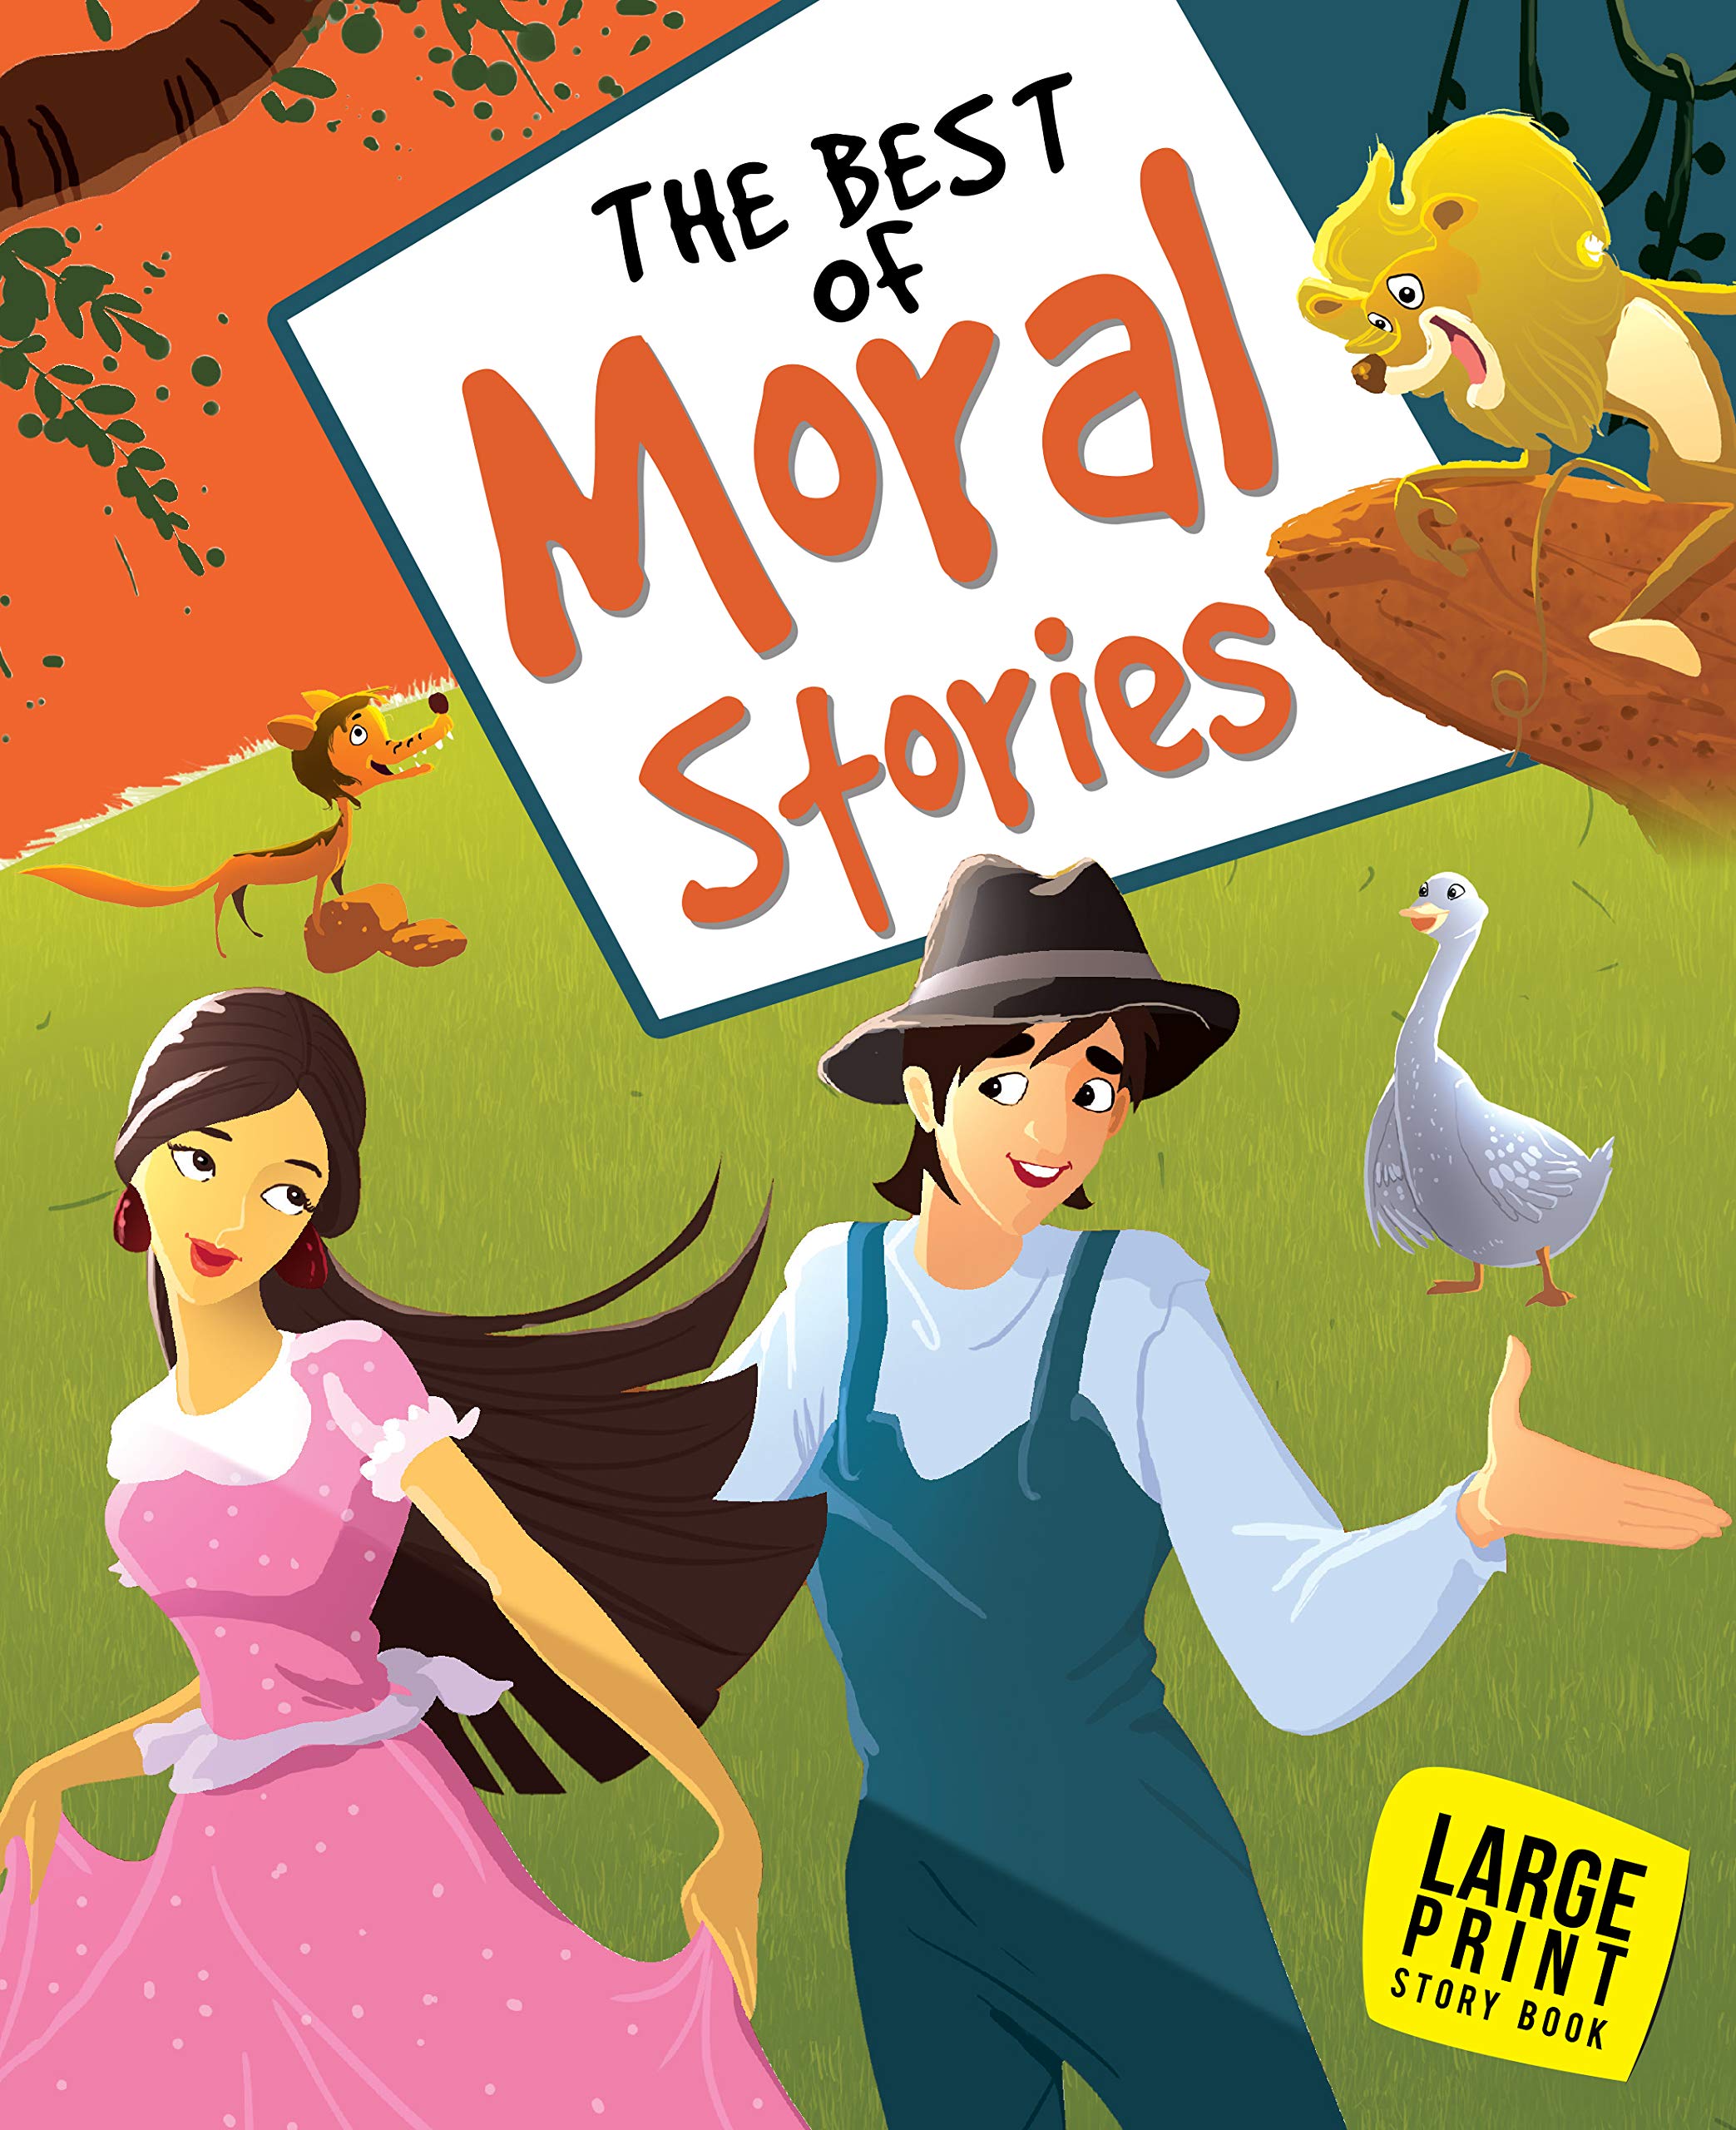 Large Print Story Book : The Best of Moral Stories (হার্ডকভার)